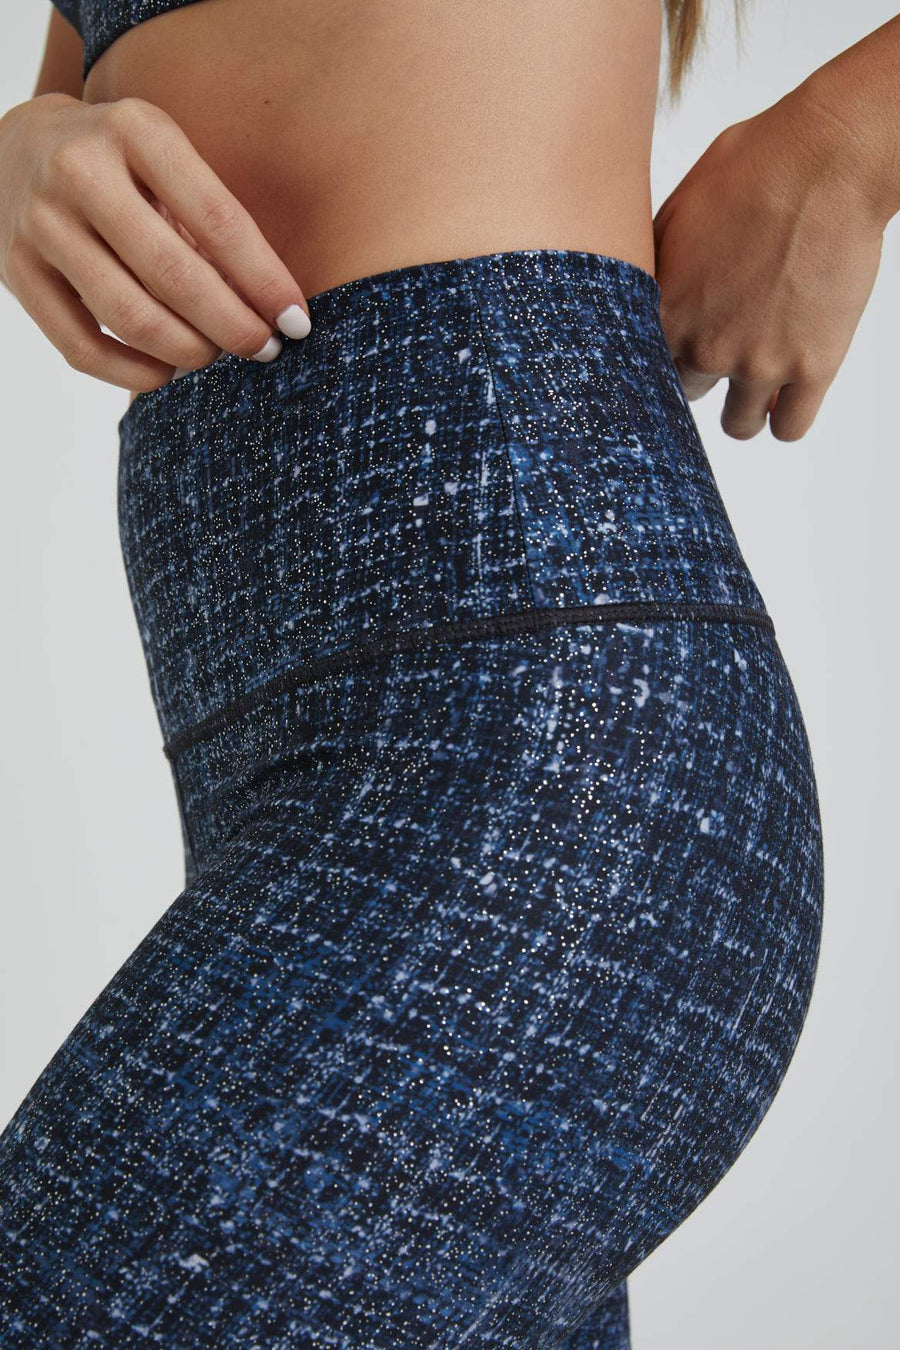 High Waisted Leggings Navy Tweed With Foil